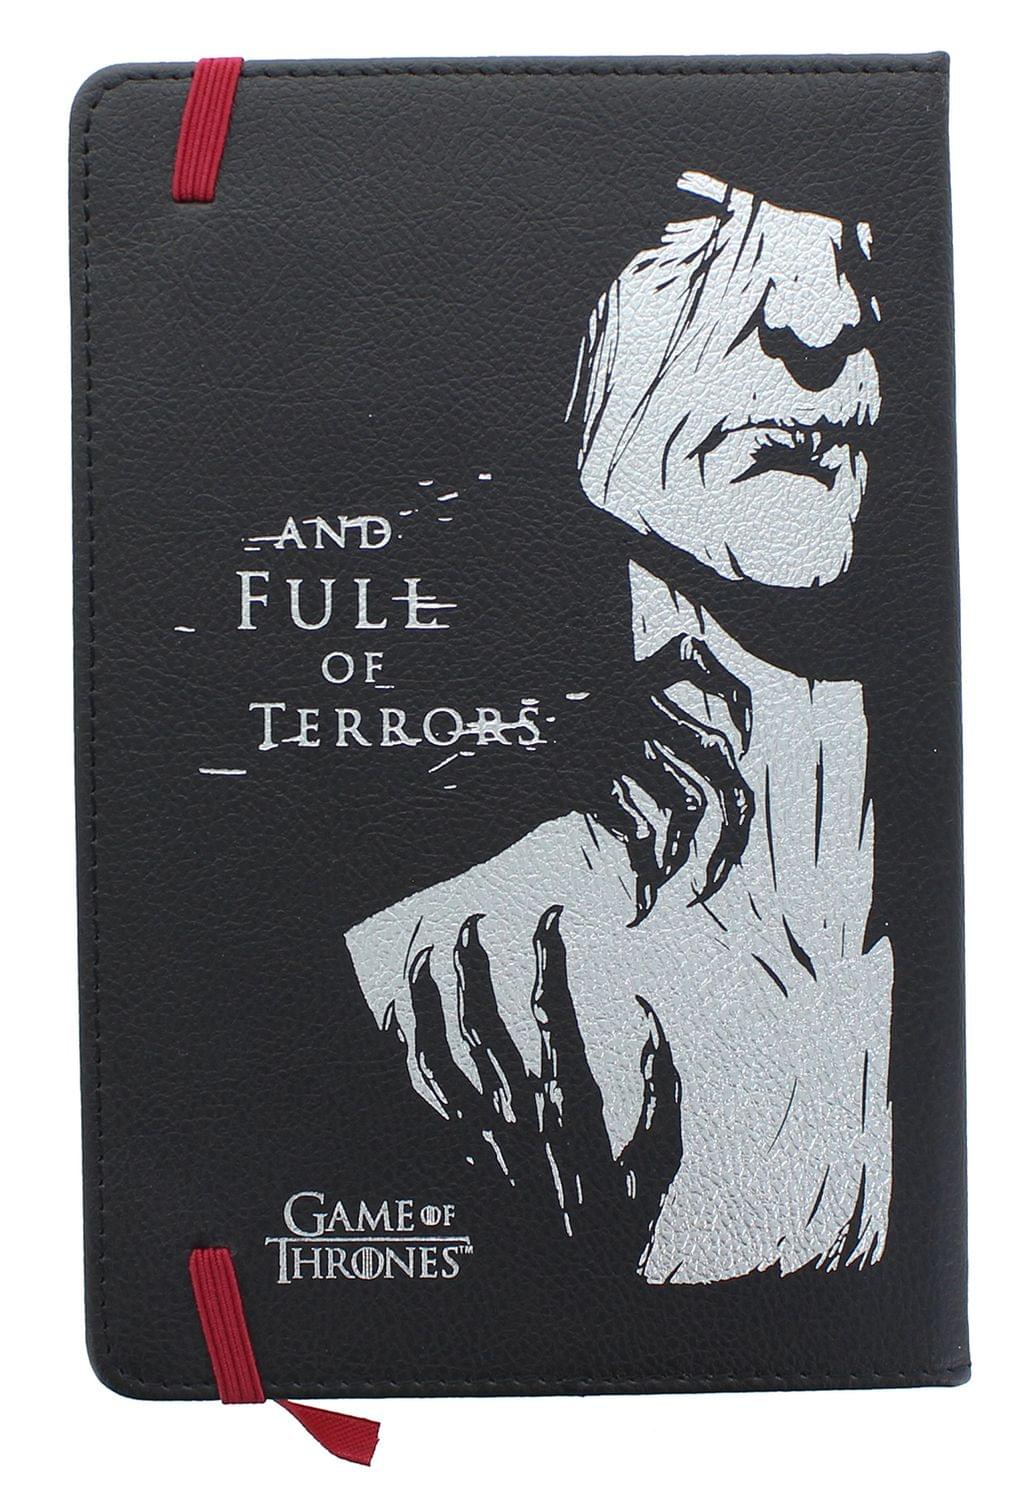 Game Of Thrones Night Is Dark And Full Of Terrors Journal